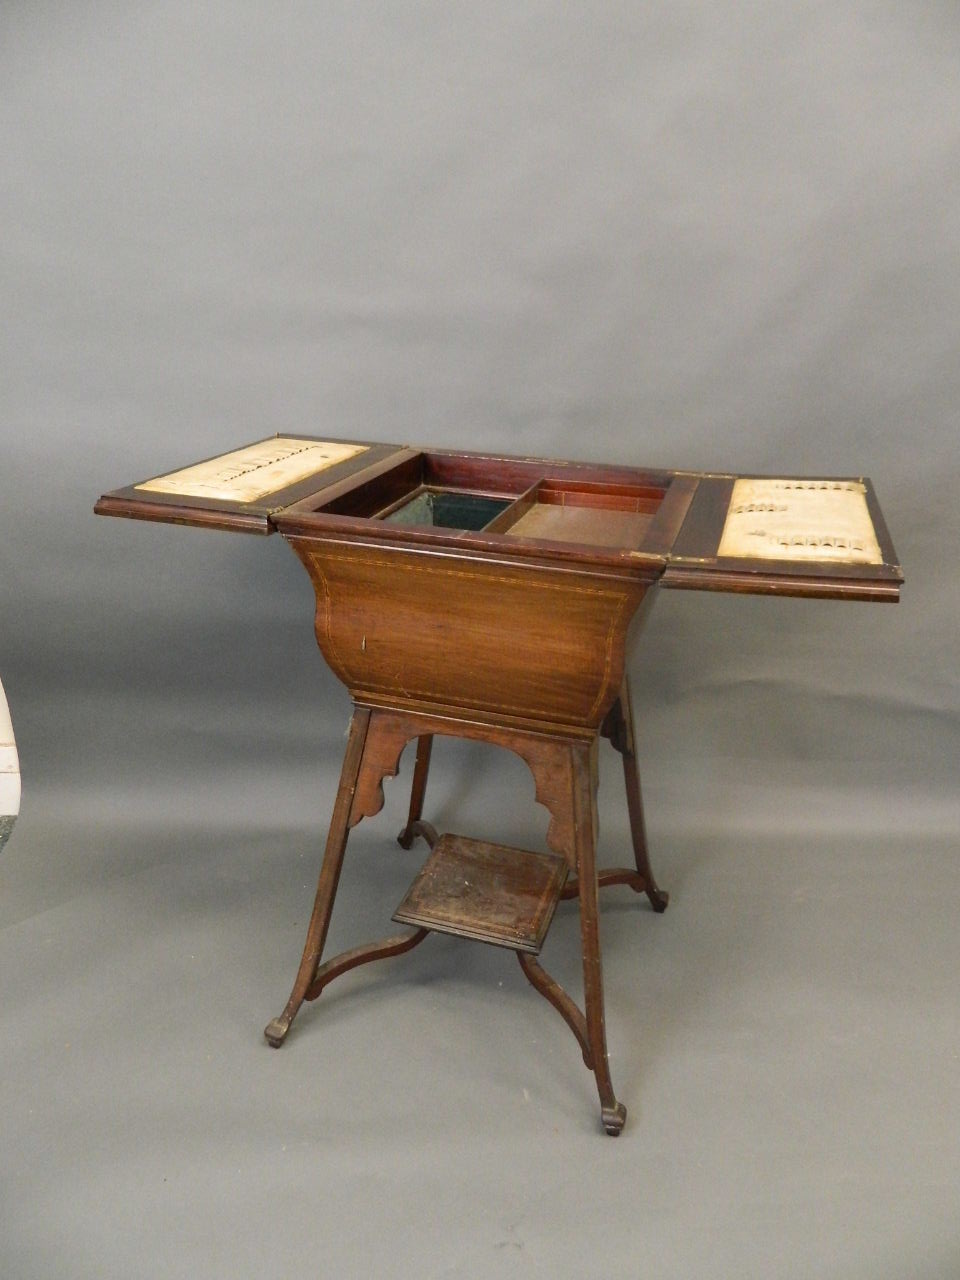 An Edwardian inlaid mahogany work box with single drawer and top flaps opening to reveal a slide and - Image 2 of 5